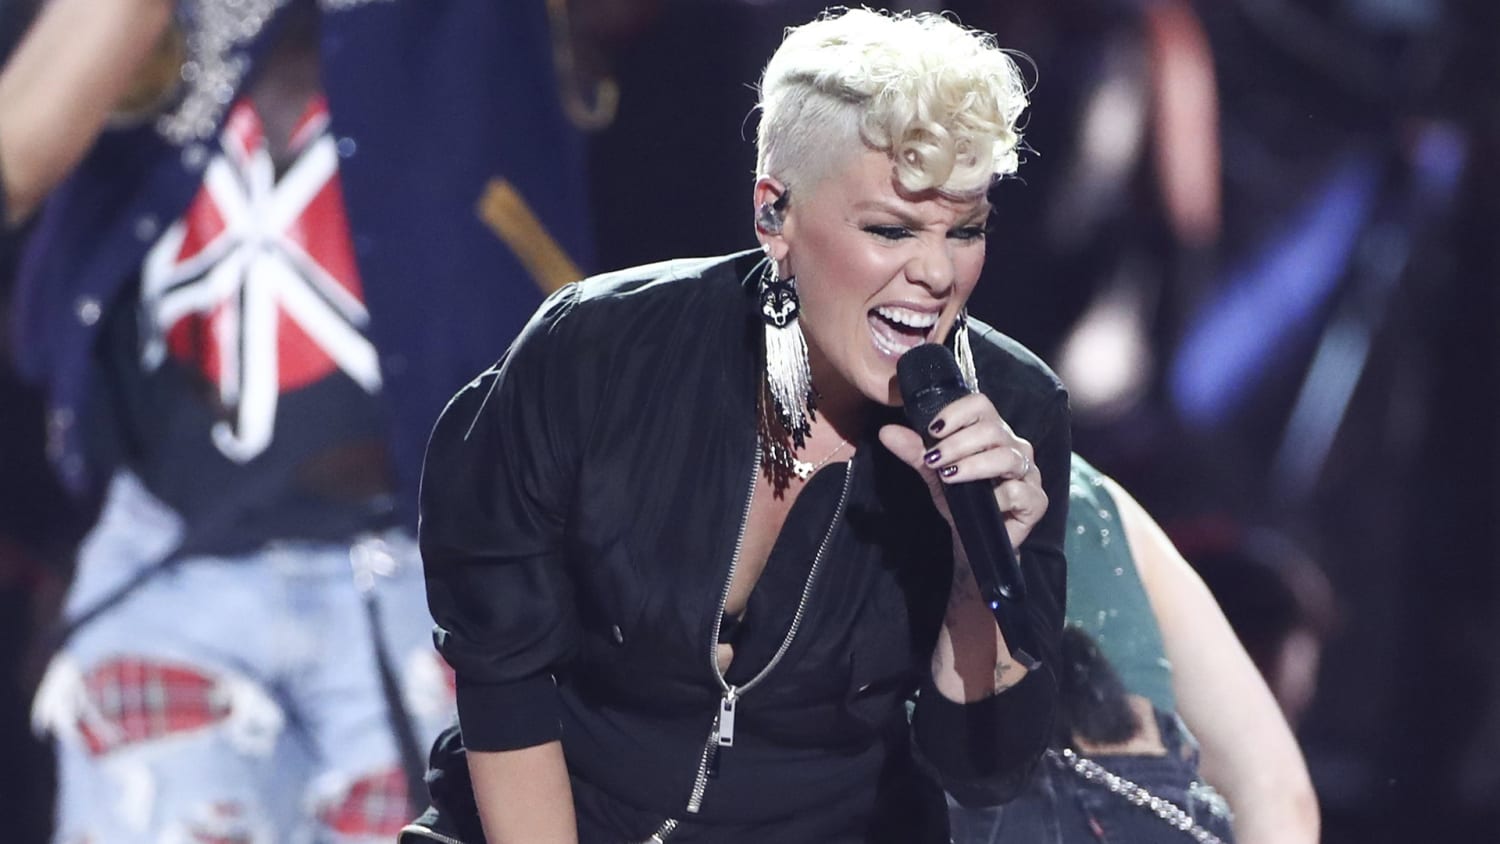 P!nk (Singer) - On This Day